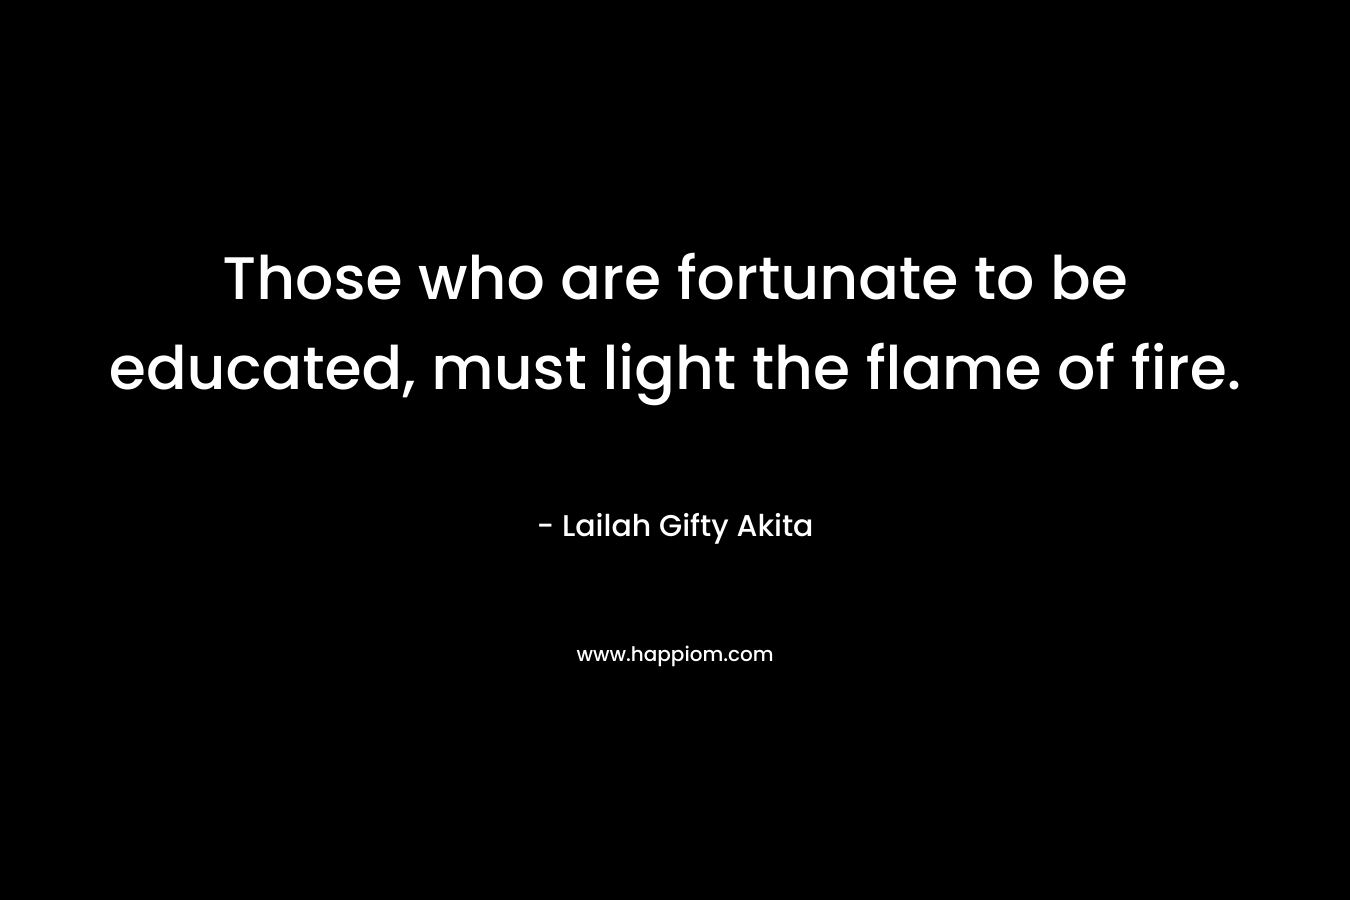 Those who are fortunate to be educated, must light the flame of fire.